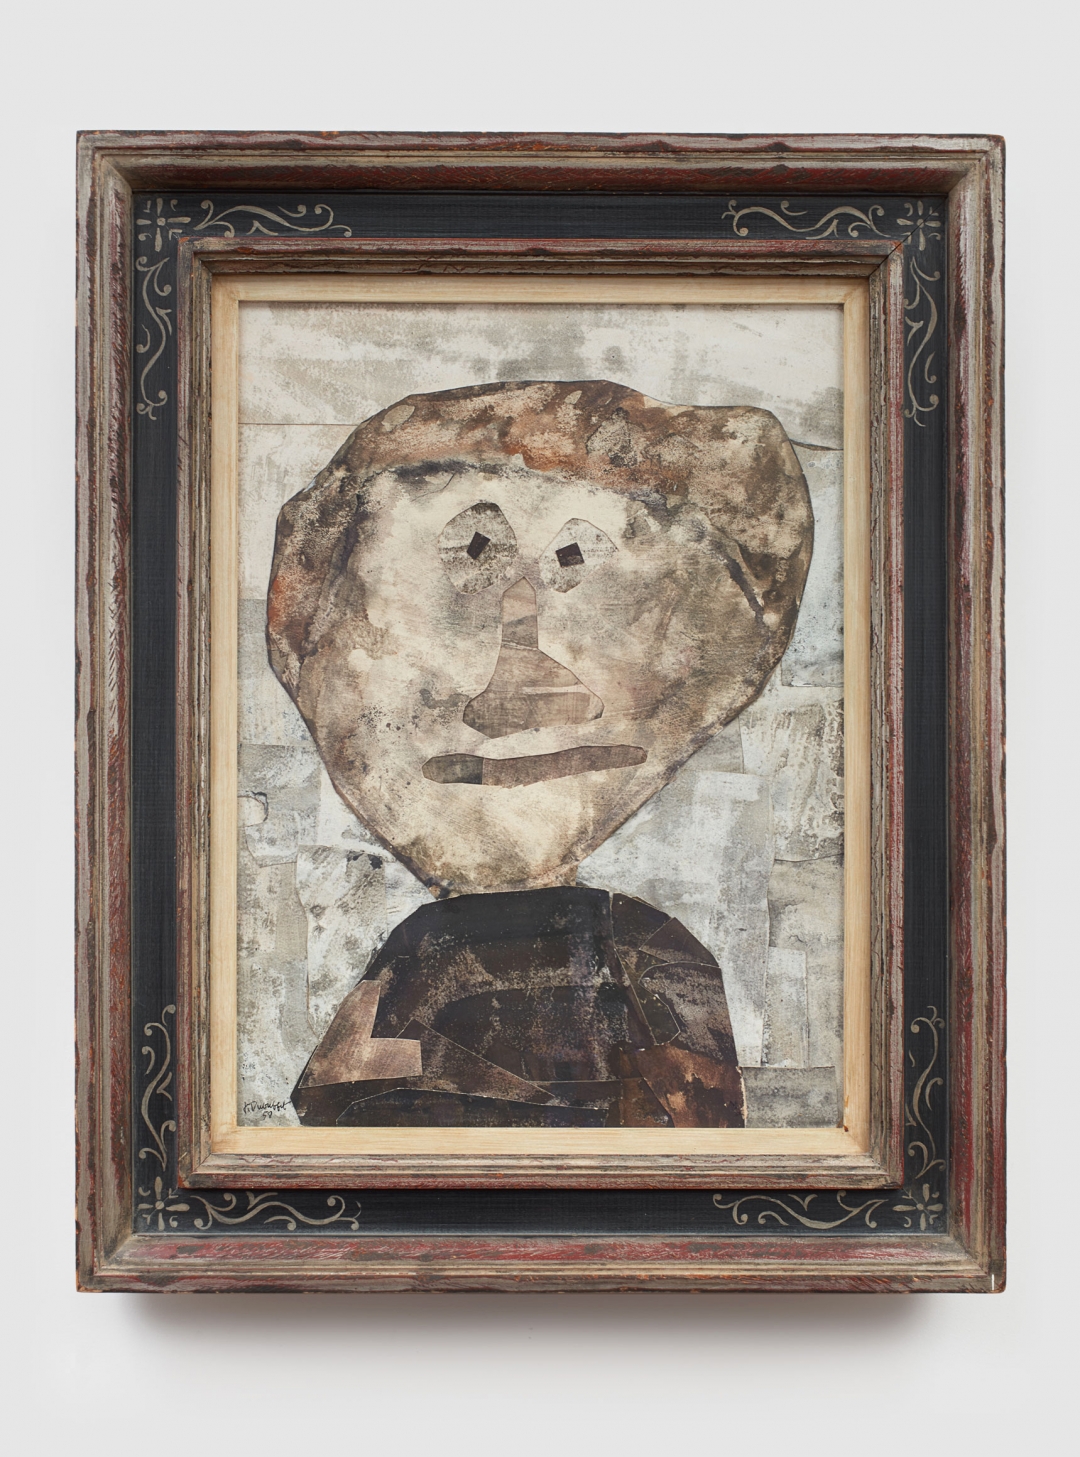 Jean Dubuffet, <i>Portrait d’Homme</i>, 1958, Collage mounted on board, 54.61h x 41.91w cm / 21.50h x 16.50w in